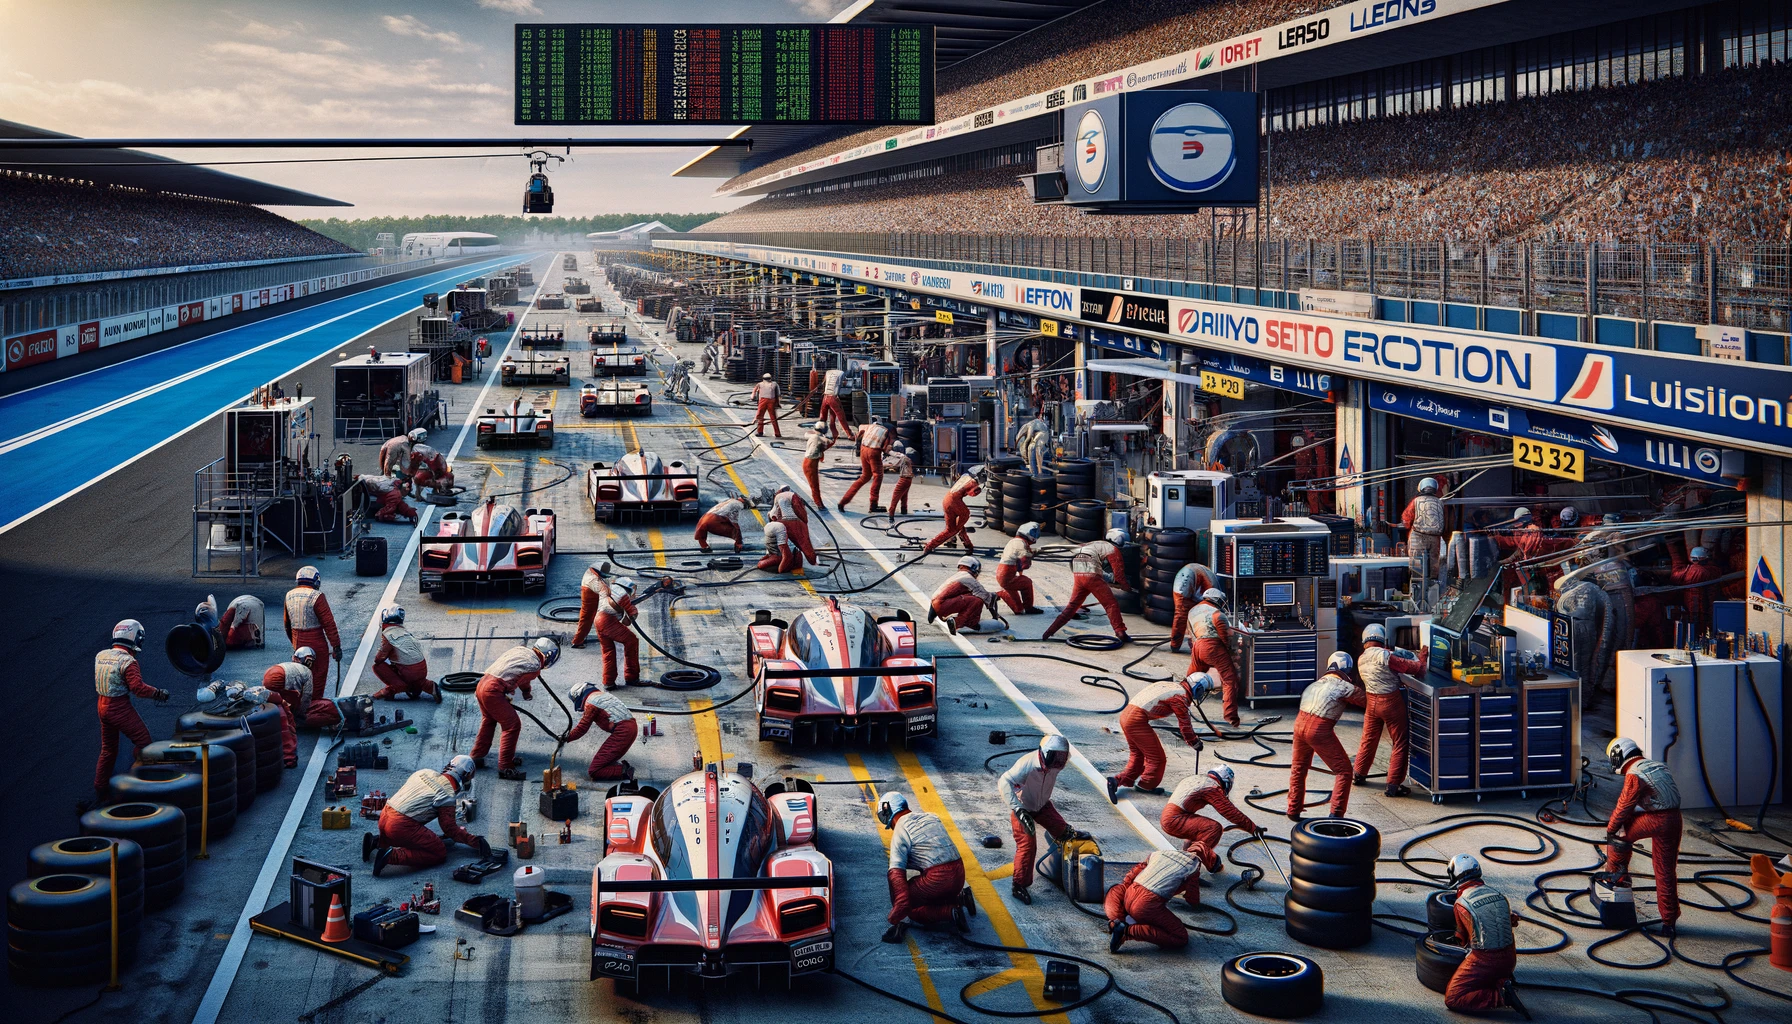 Image showing the style of Pit lane at the Le Mans race track